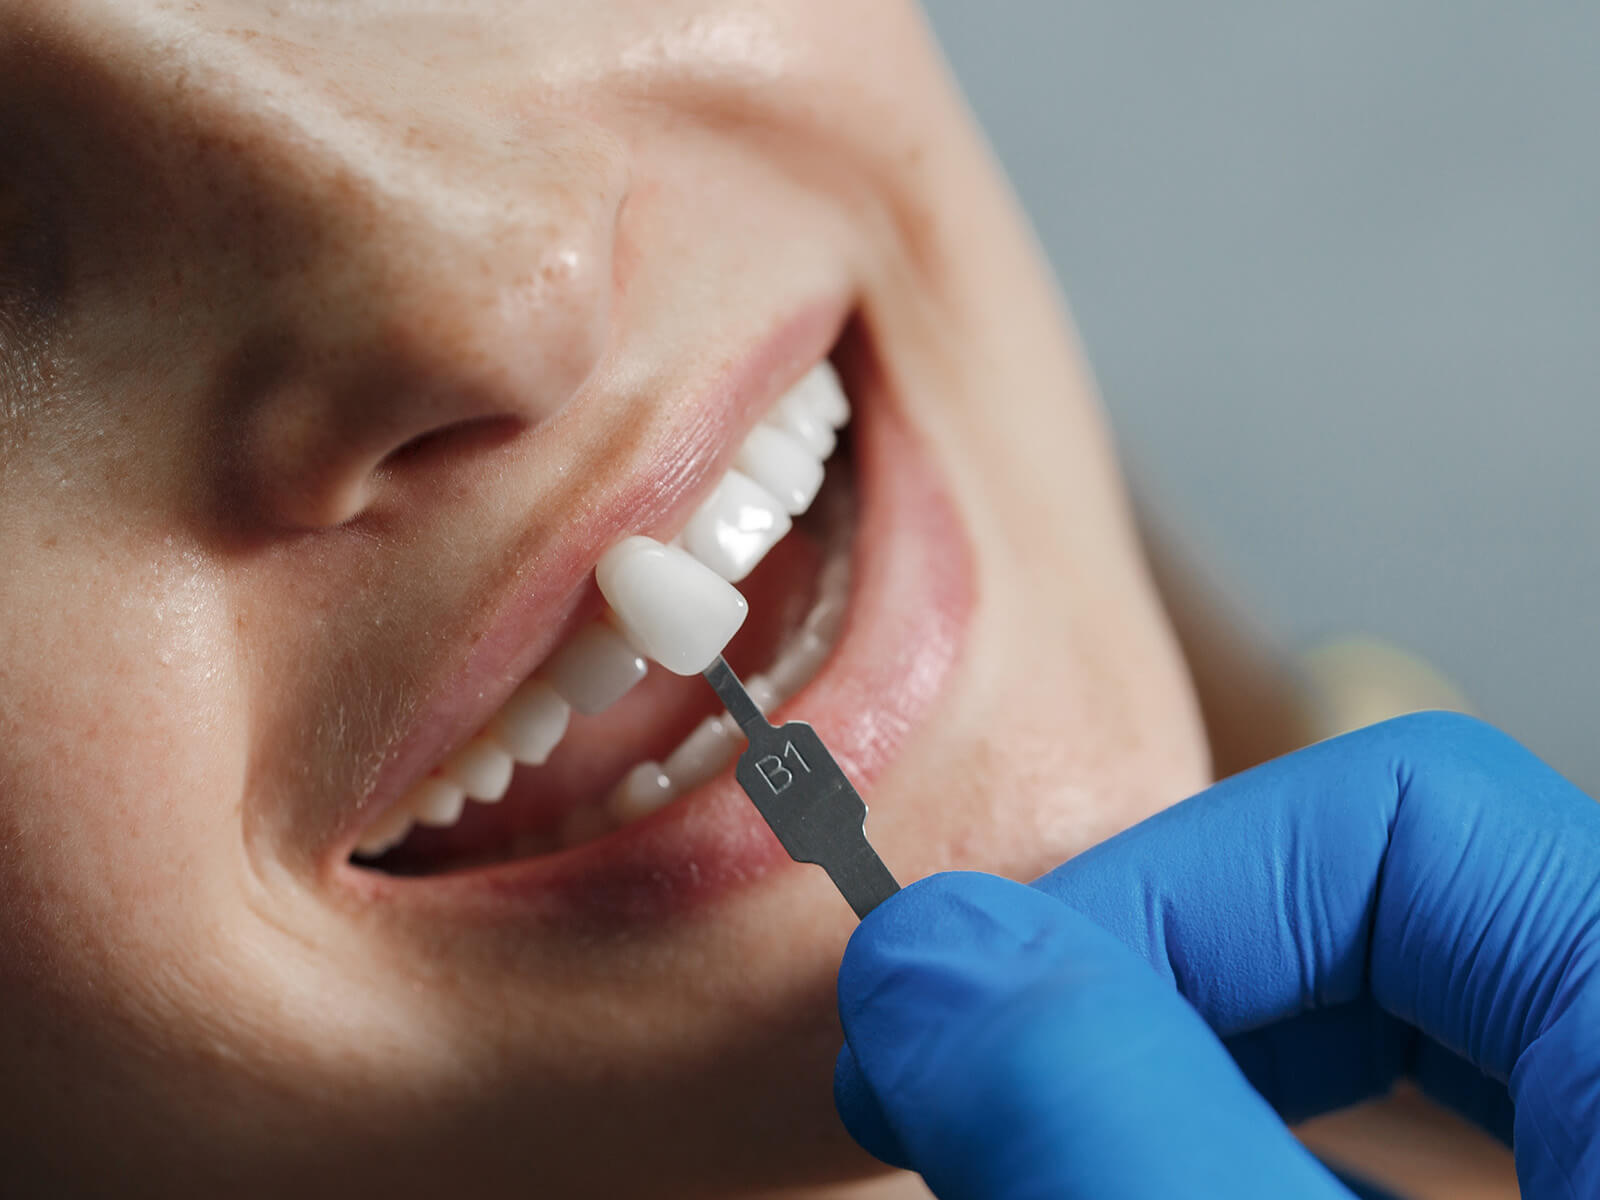 4 Cosmetic Options To Fix Small Teeth